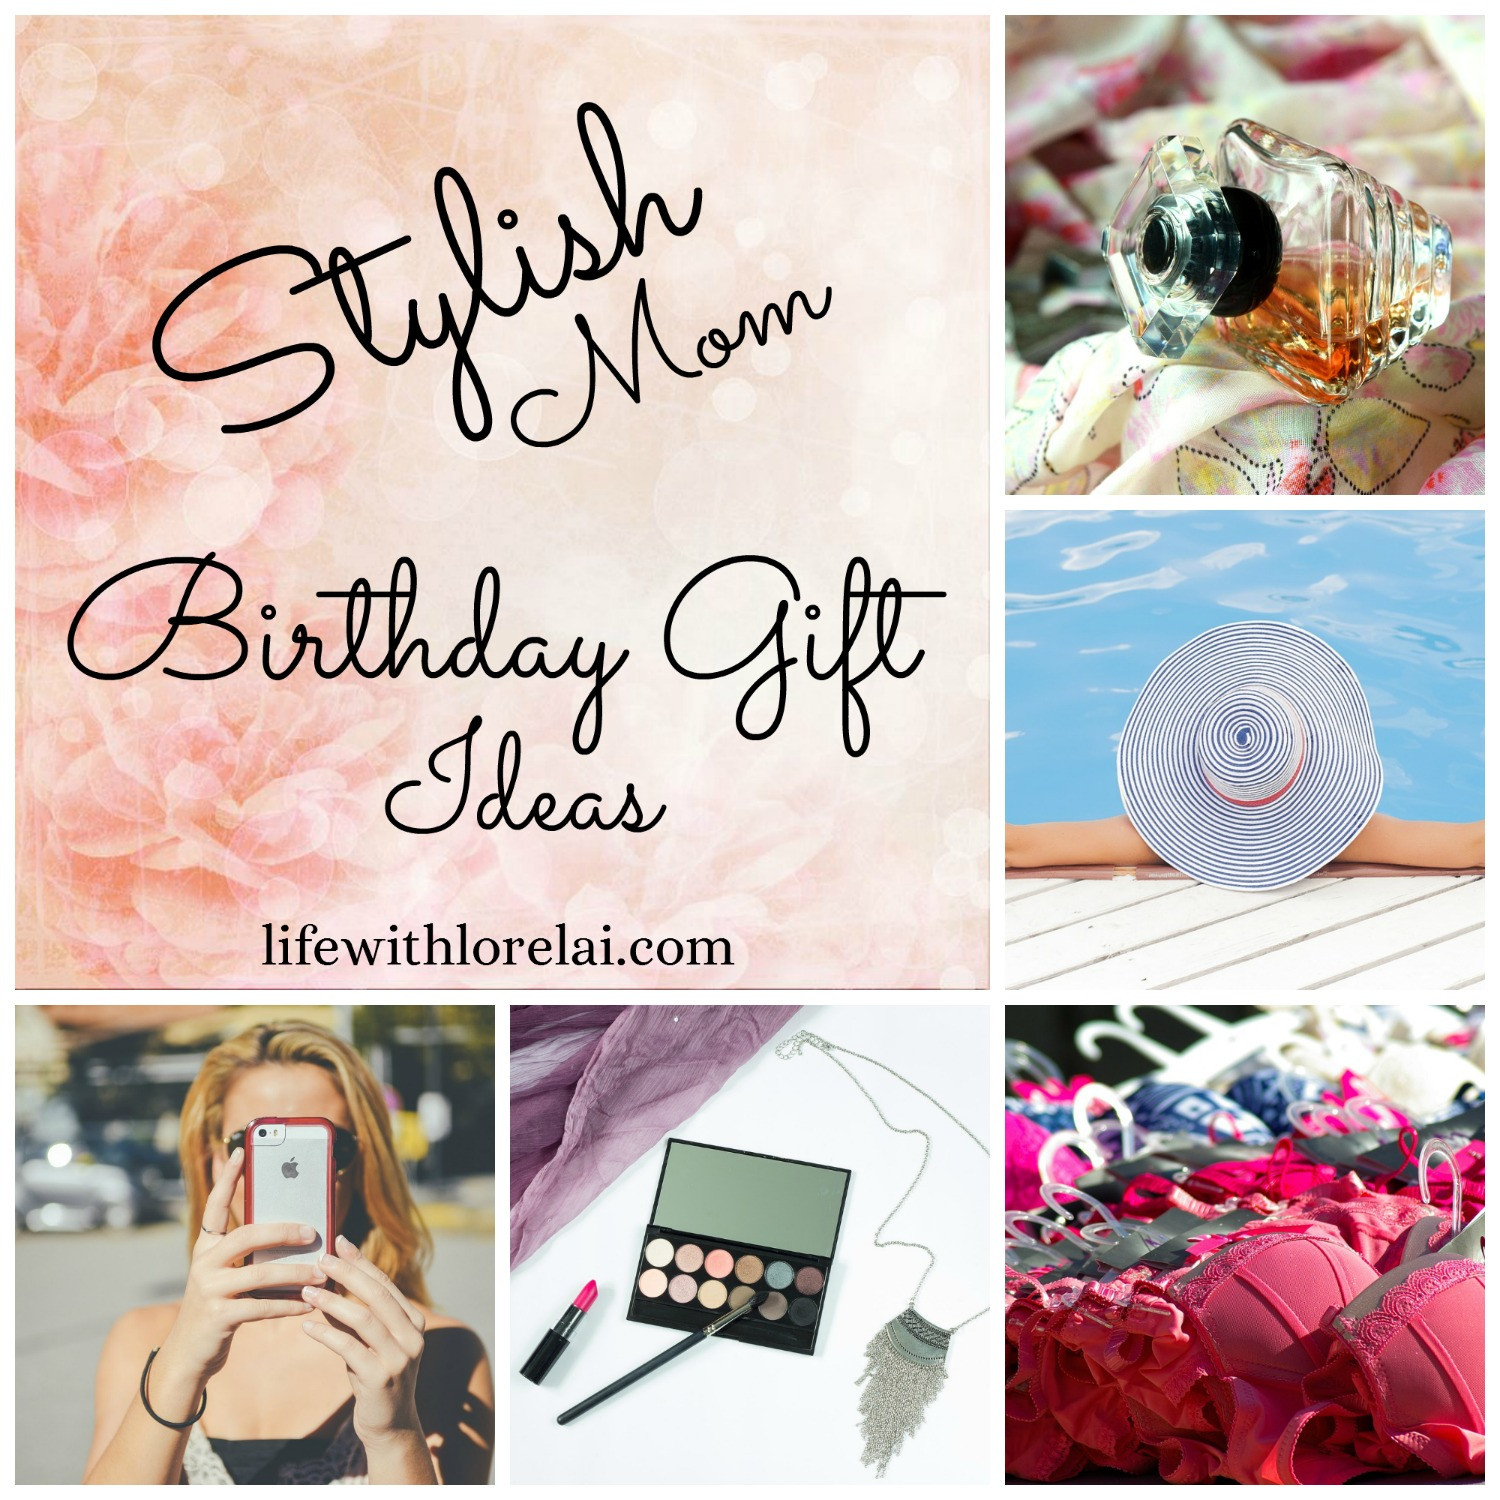 Birthday Gifts For Mom Ideas
 Birthday Gift Ideas For The Stylish Mom Life With Lorelai